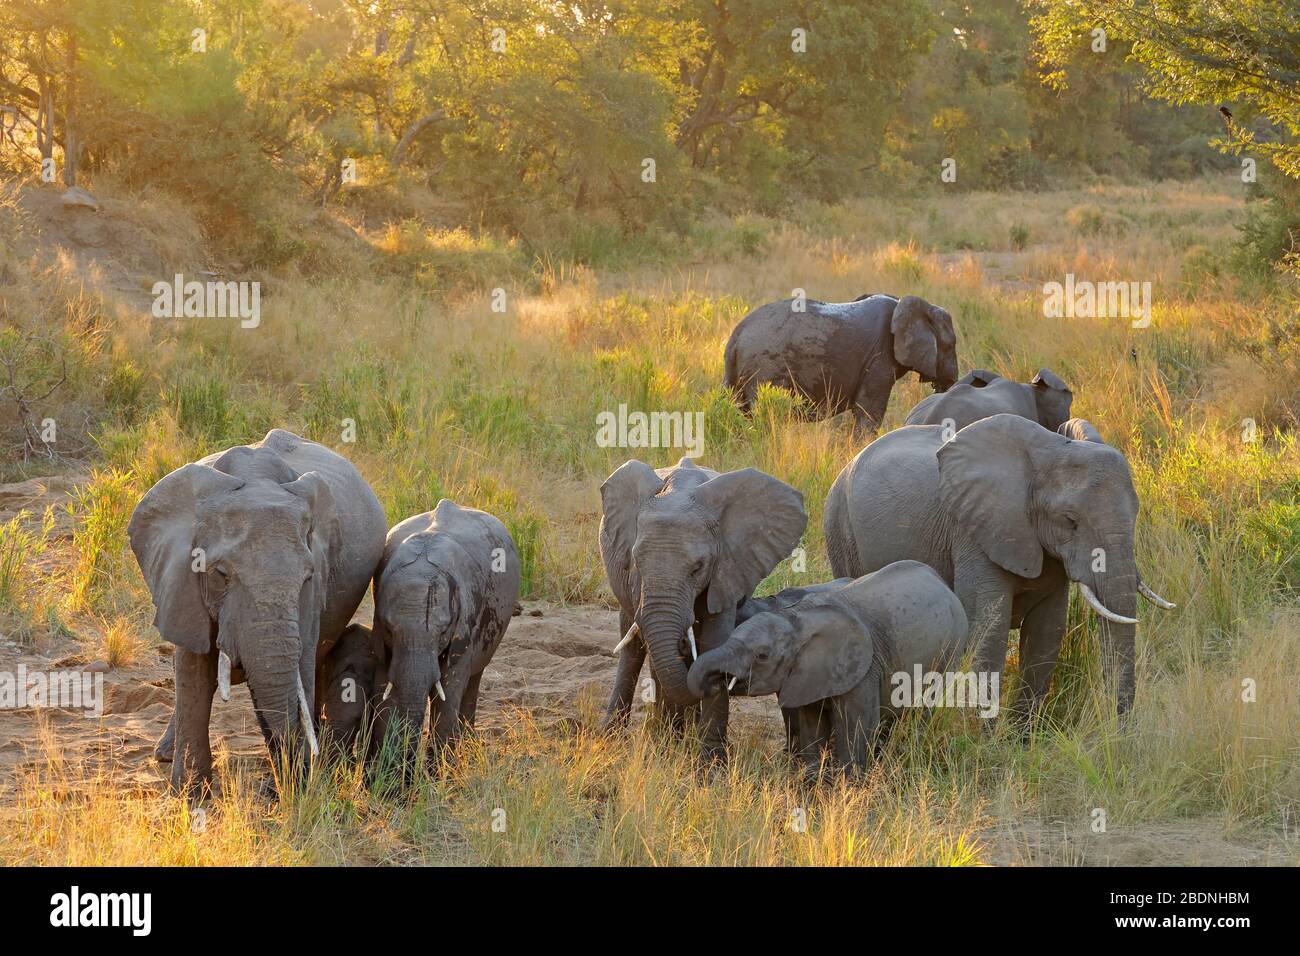 Herd of African elephants (Loxodonta africana) in late afternoon light, Kruger National Park, South Africa Stock Photo